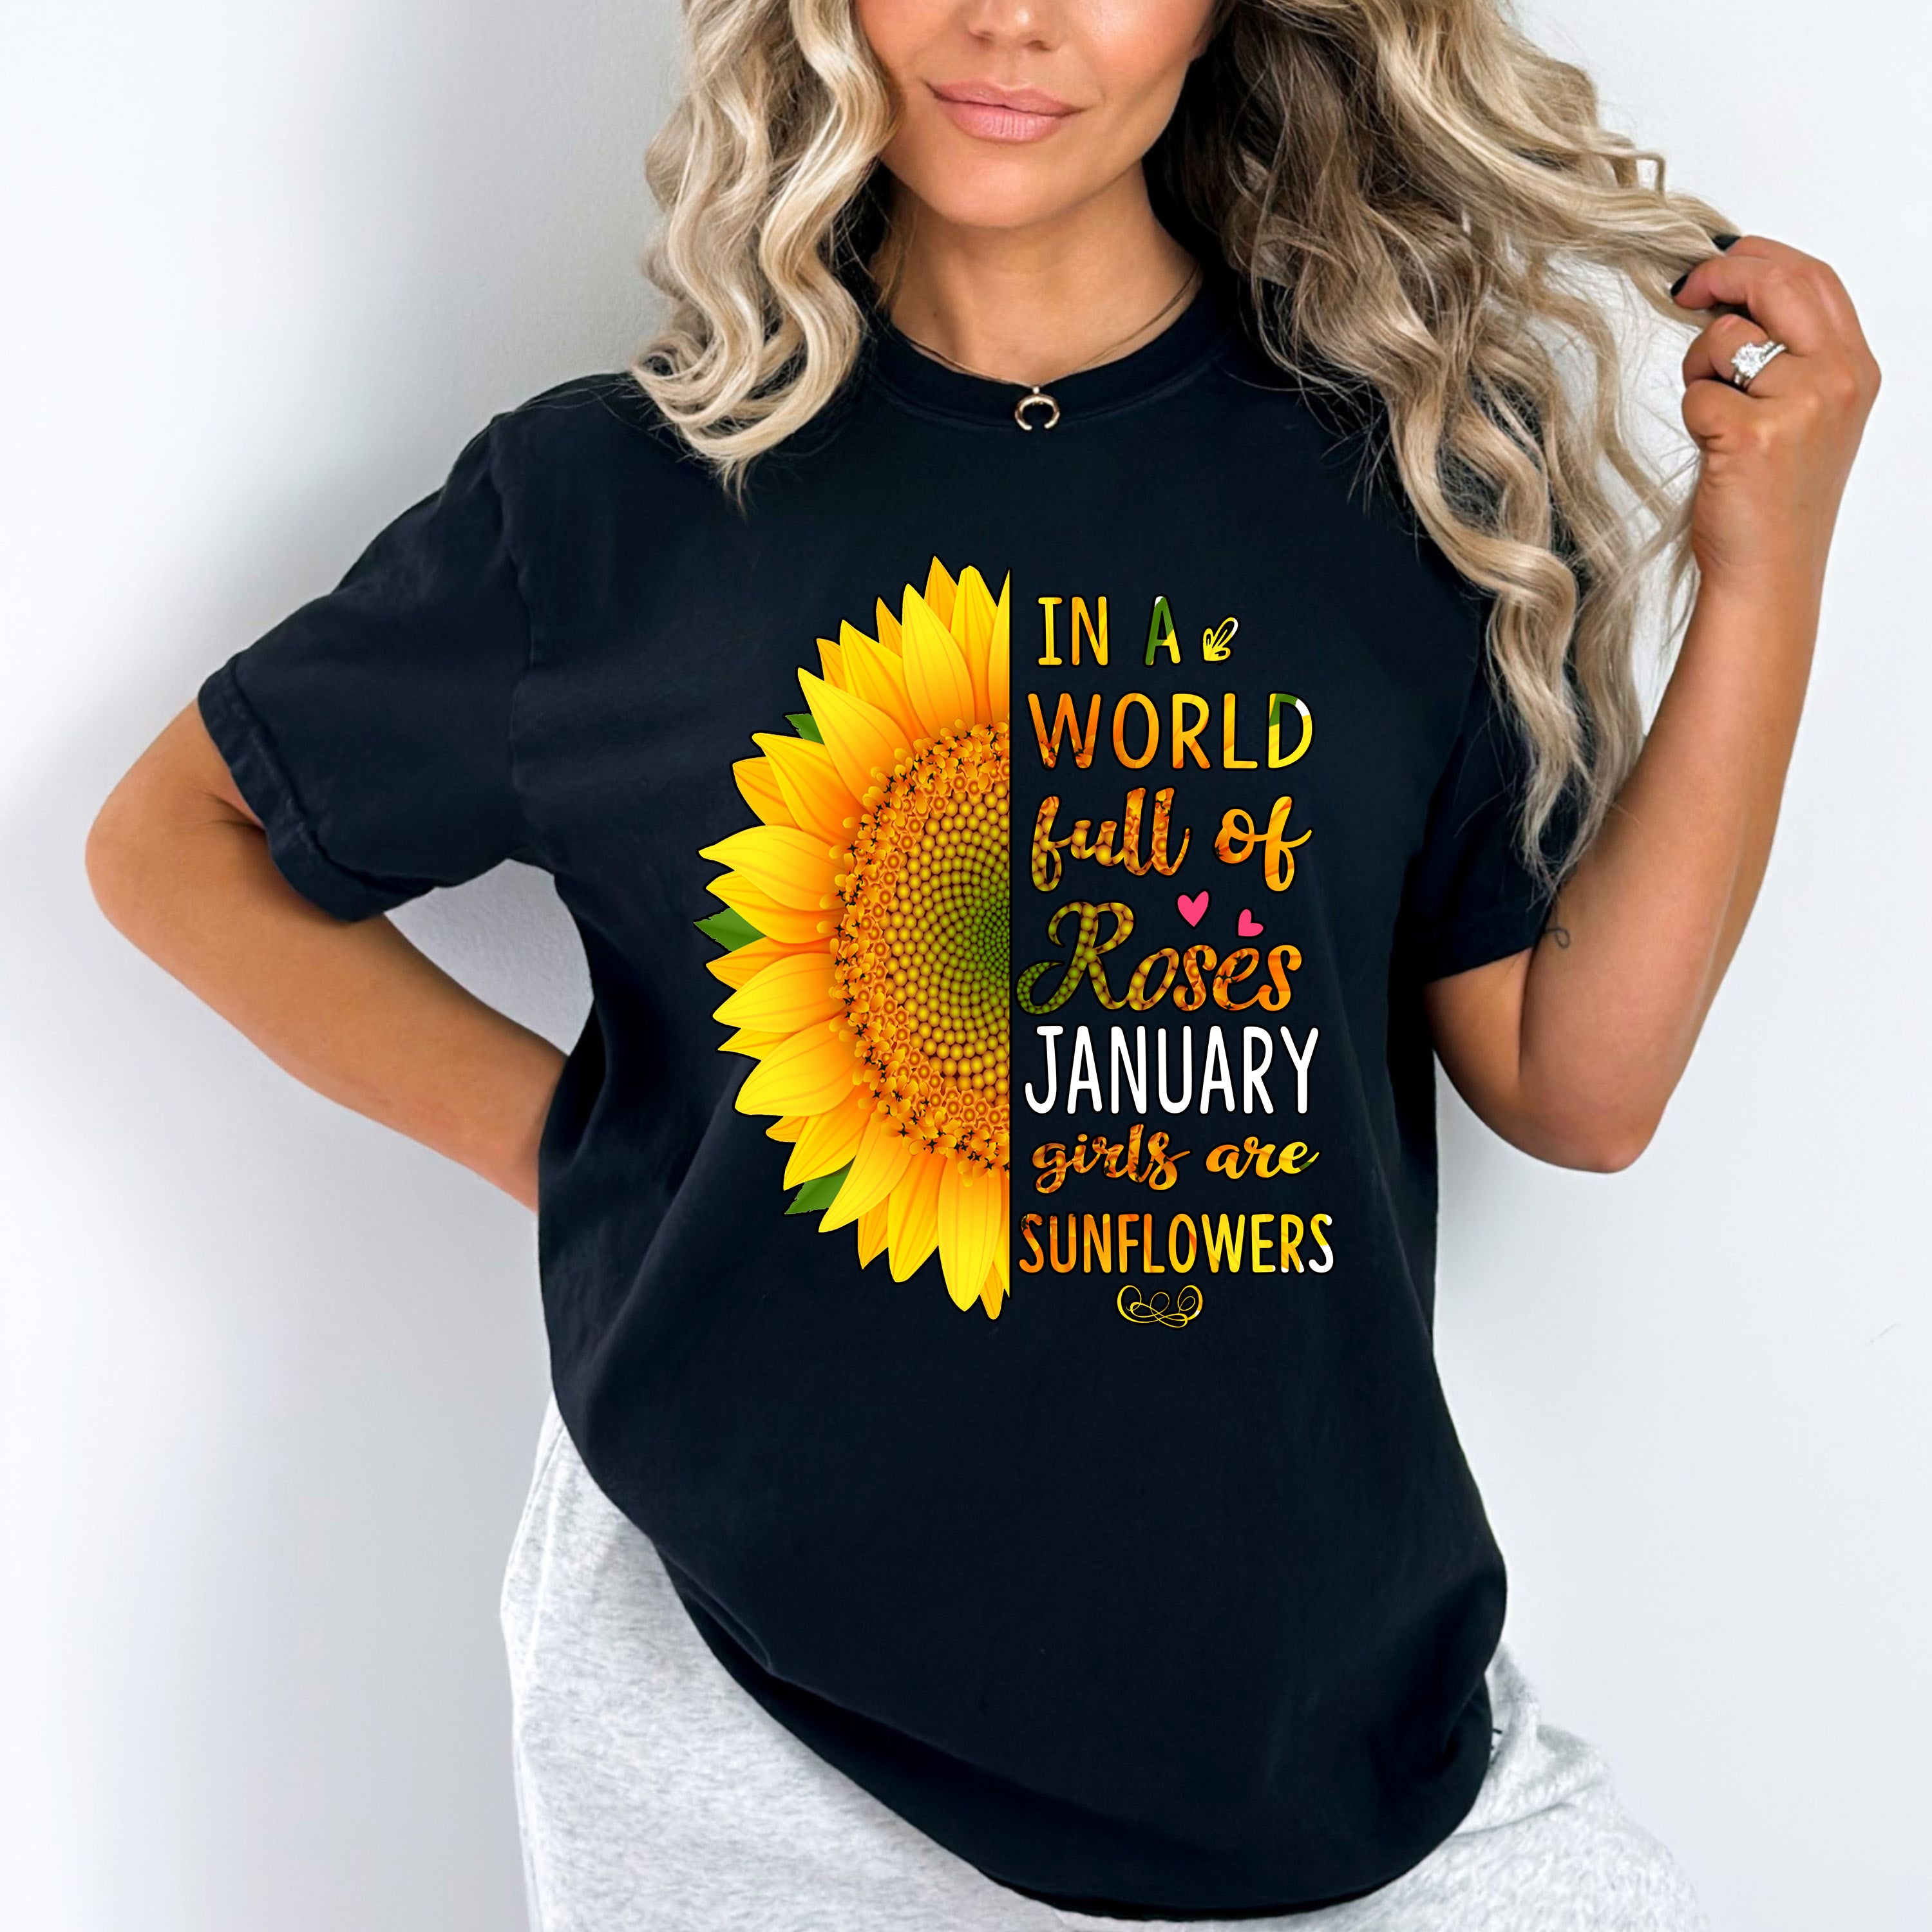 "In A World Full Of Roses January Girls are Sunflowers"